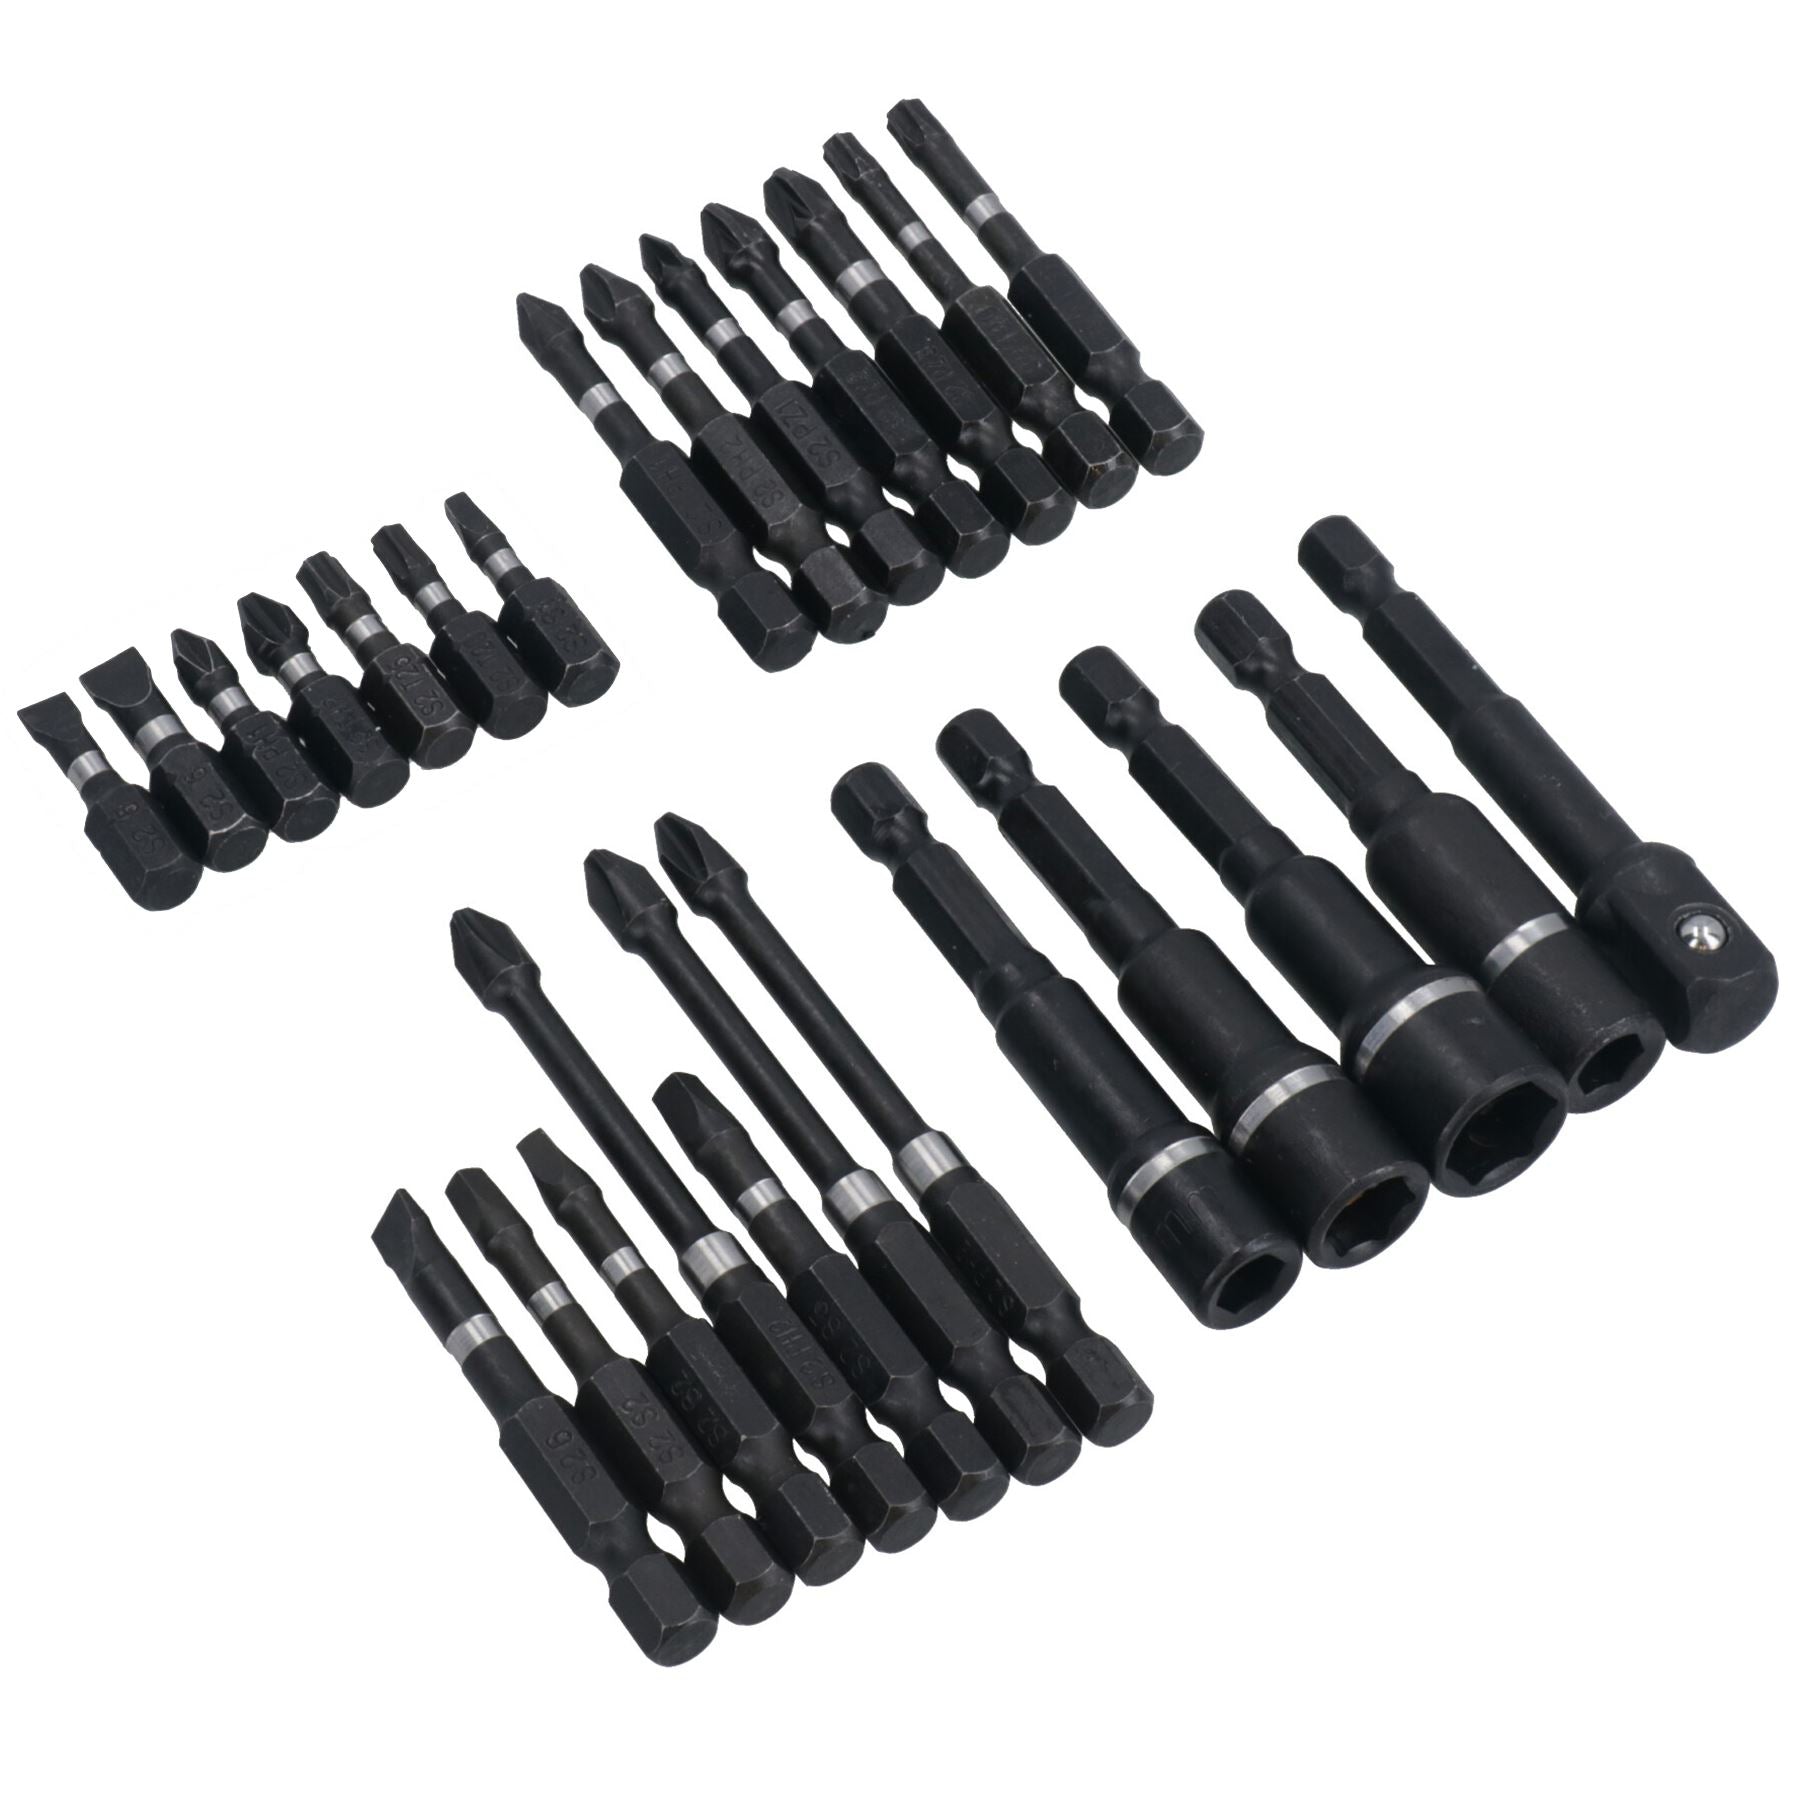 Impact Screwdriver And Nut Driver Bits Phillips Pozi Slotted 26pc Shallow + Deep